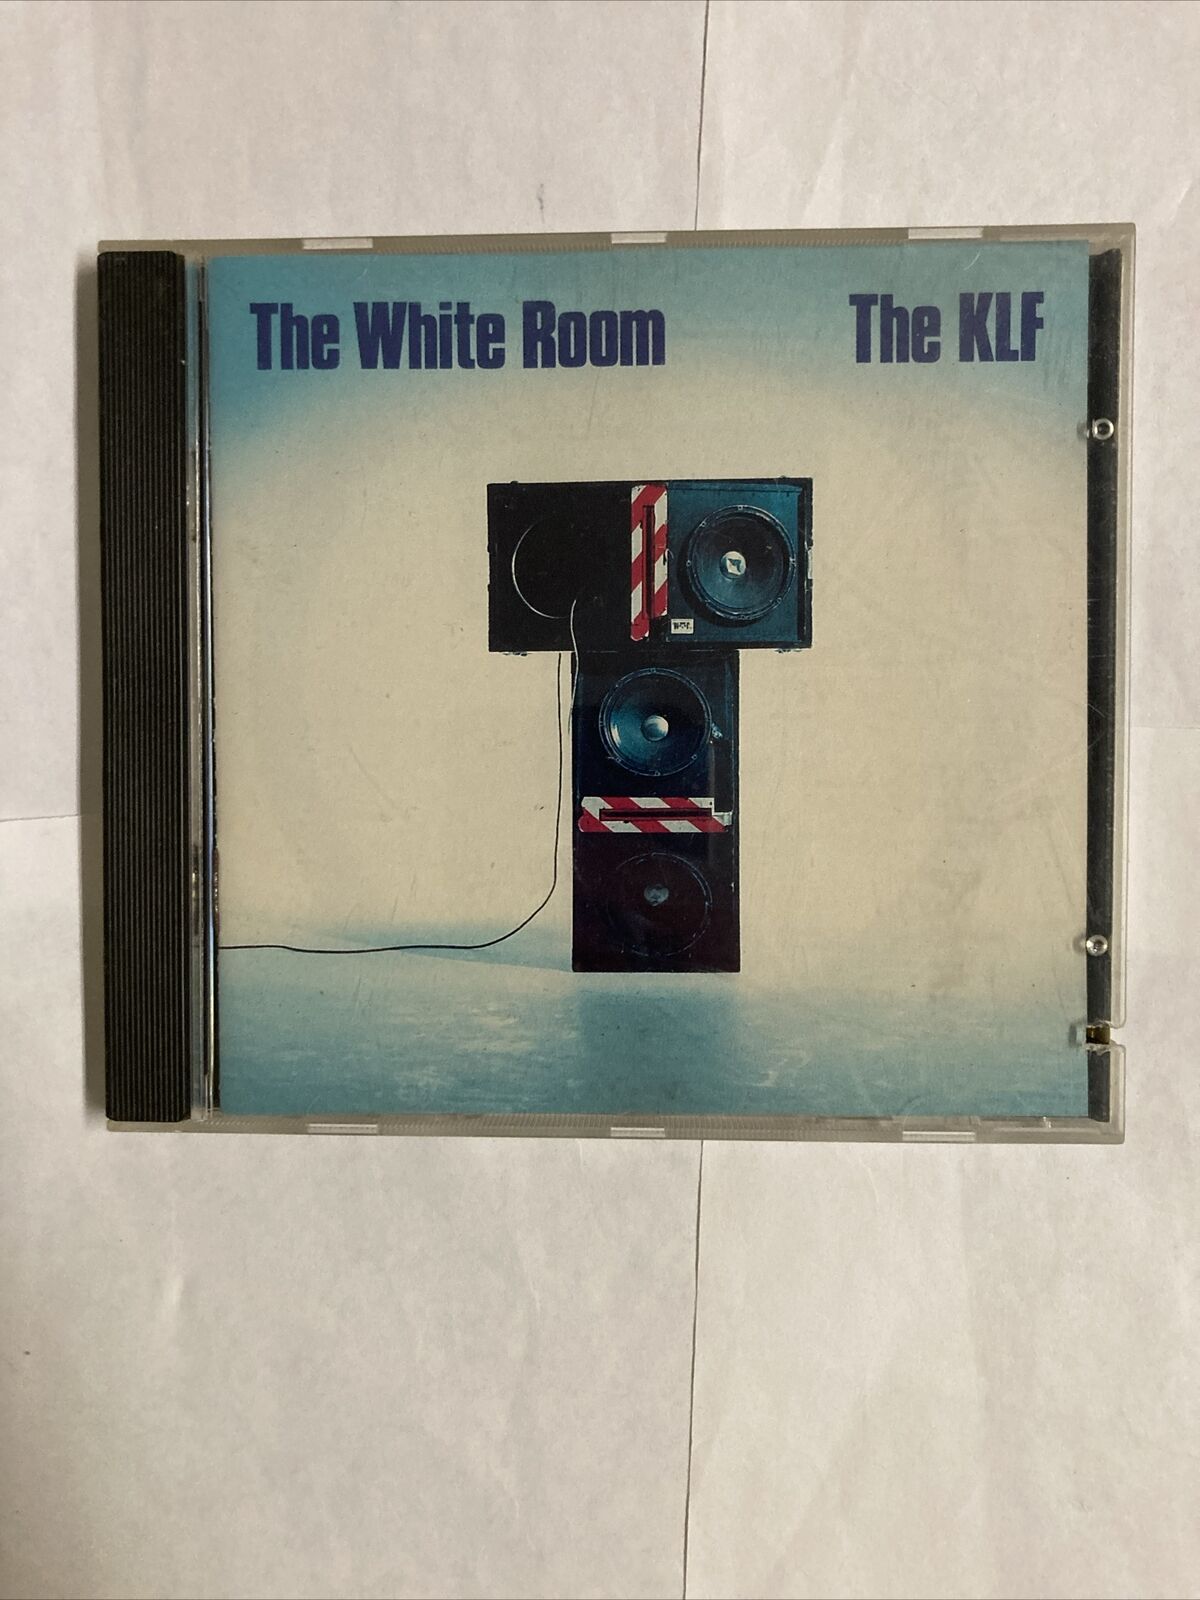 The White Room by The KLF (CD, 1991, Arista ARCD-8657